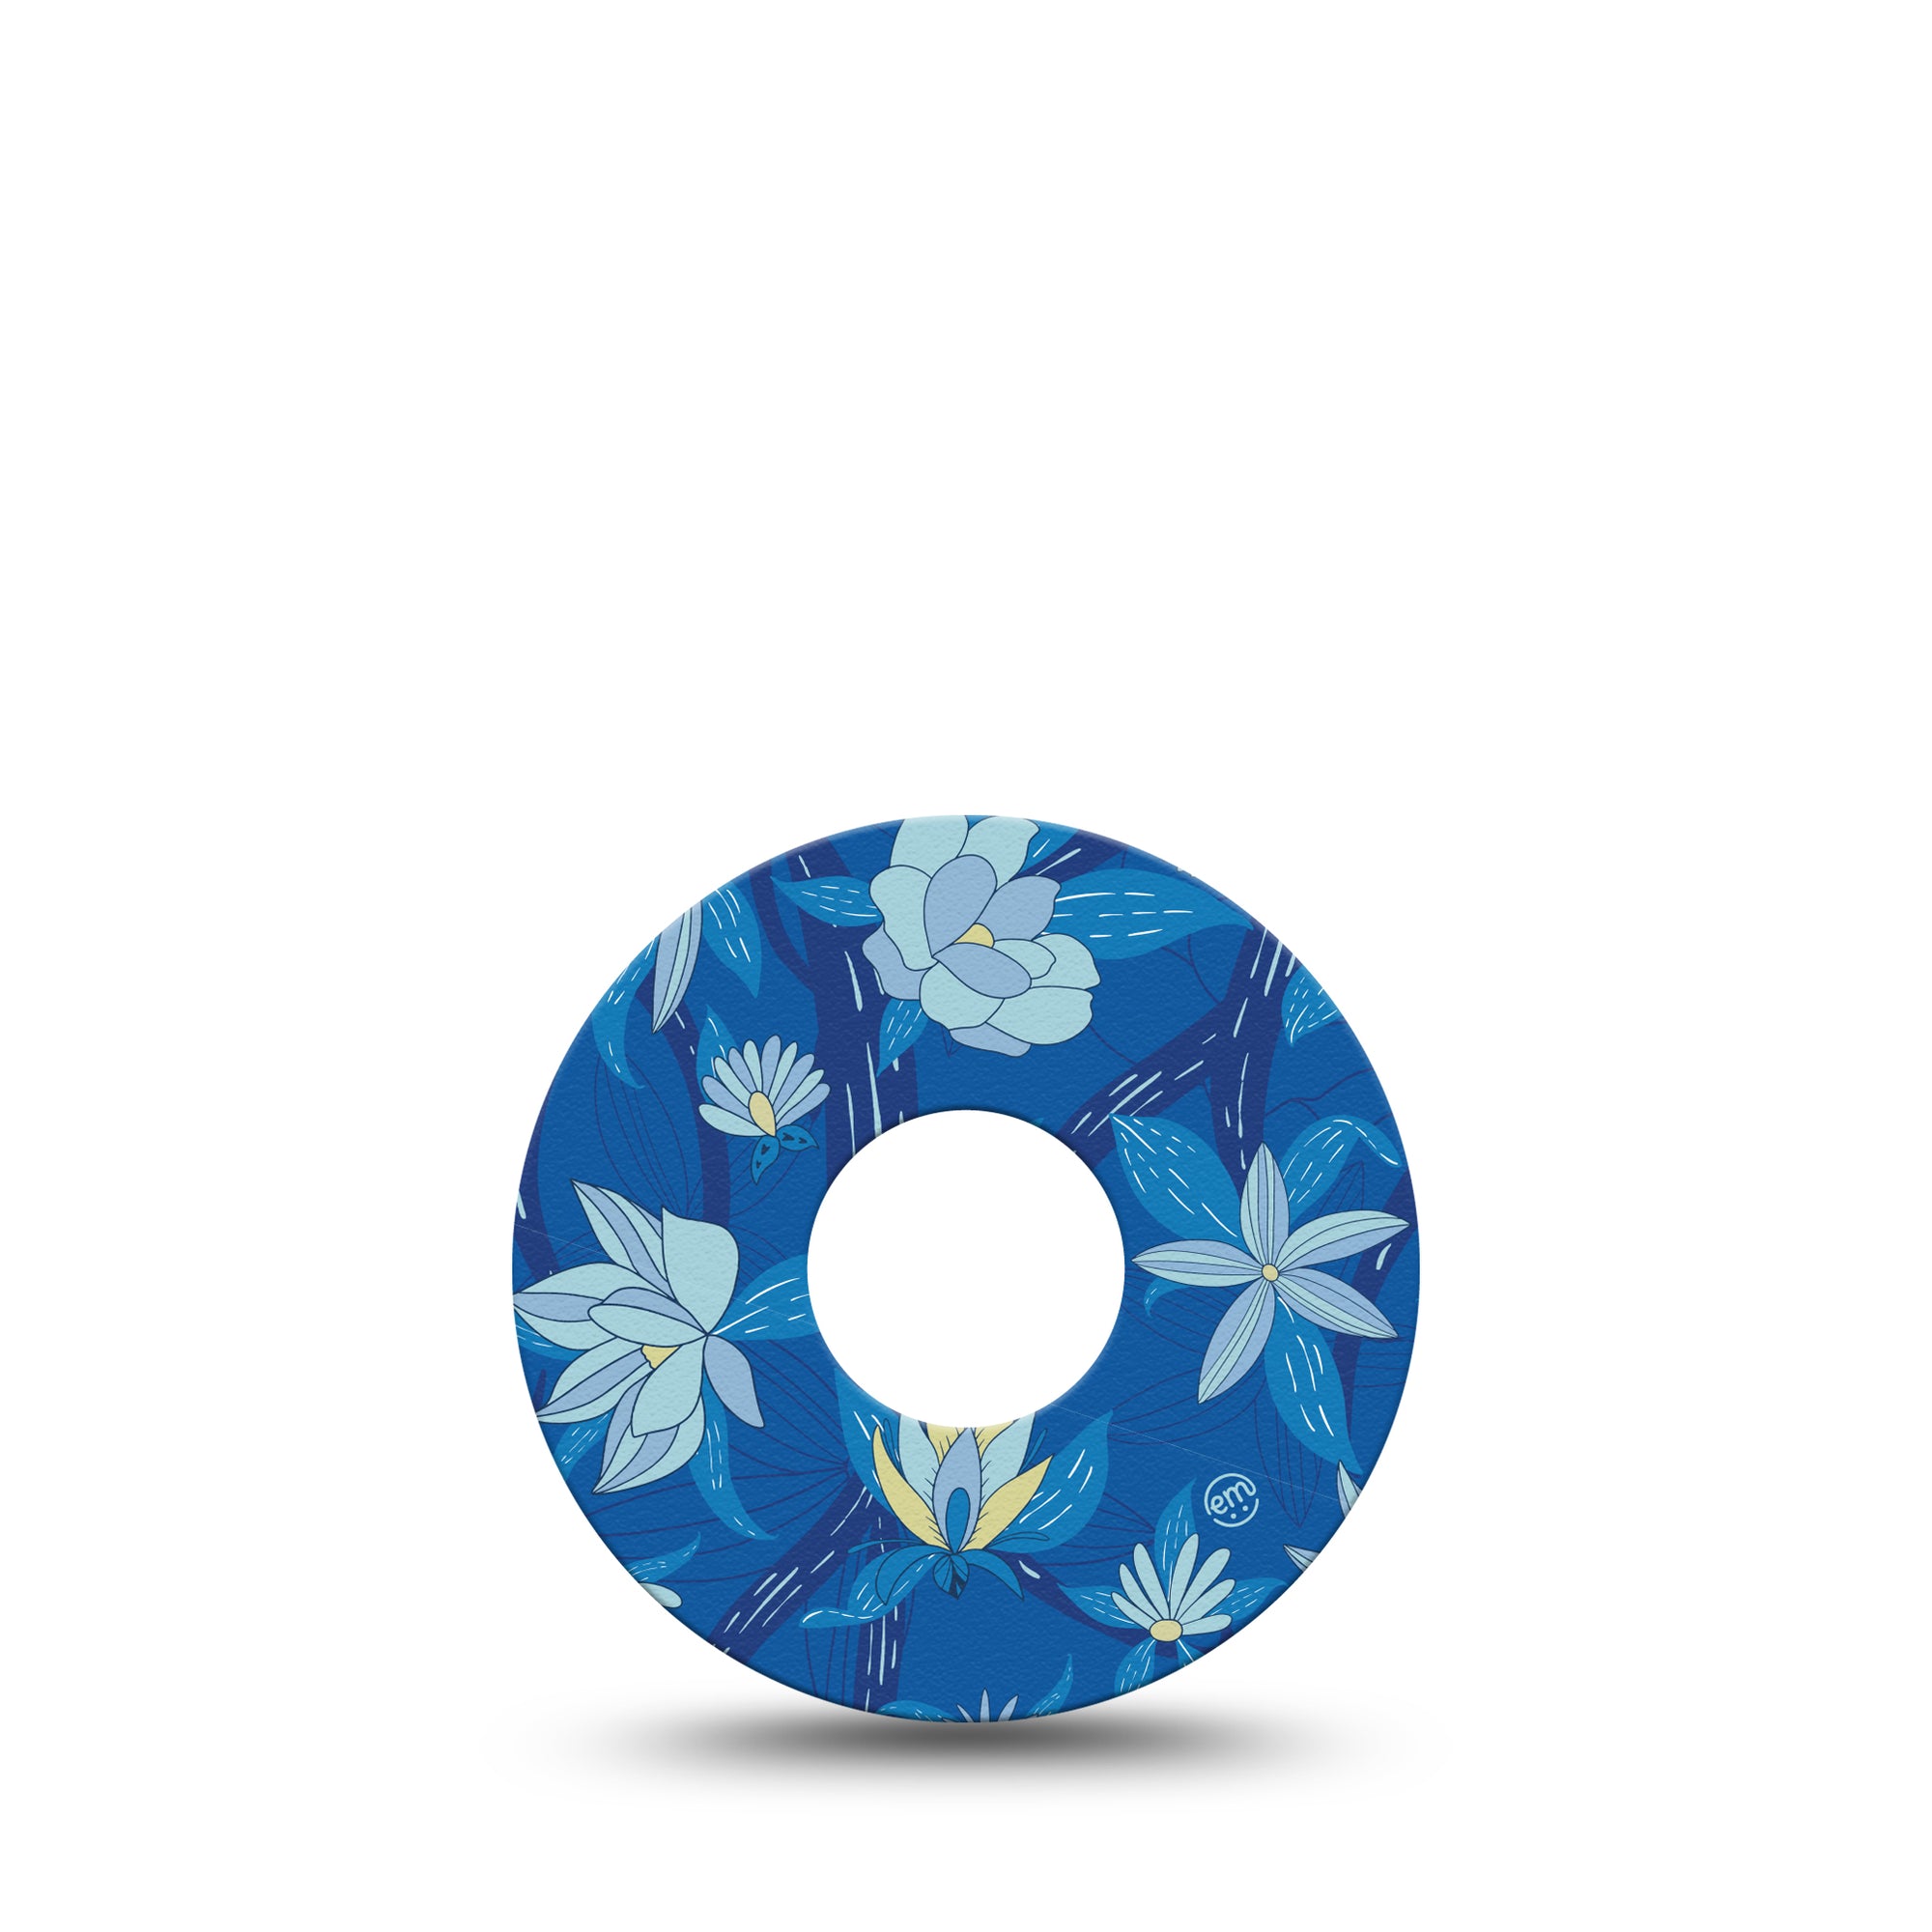 Bold Blue Flowers Libre 3 Perfect Fit Patch, Single, Bunch of Flowers Themed CGM Adhesive Tape Design